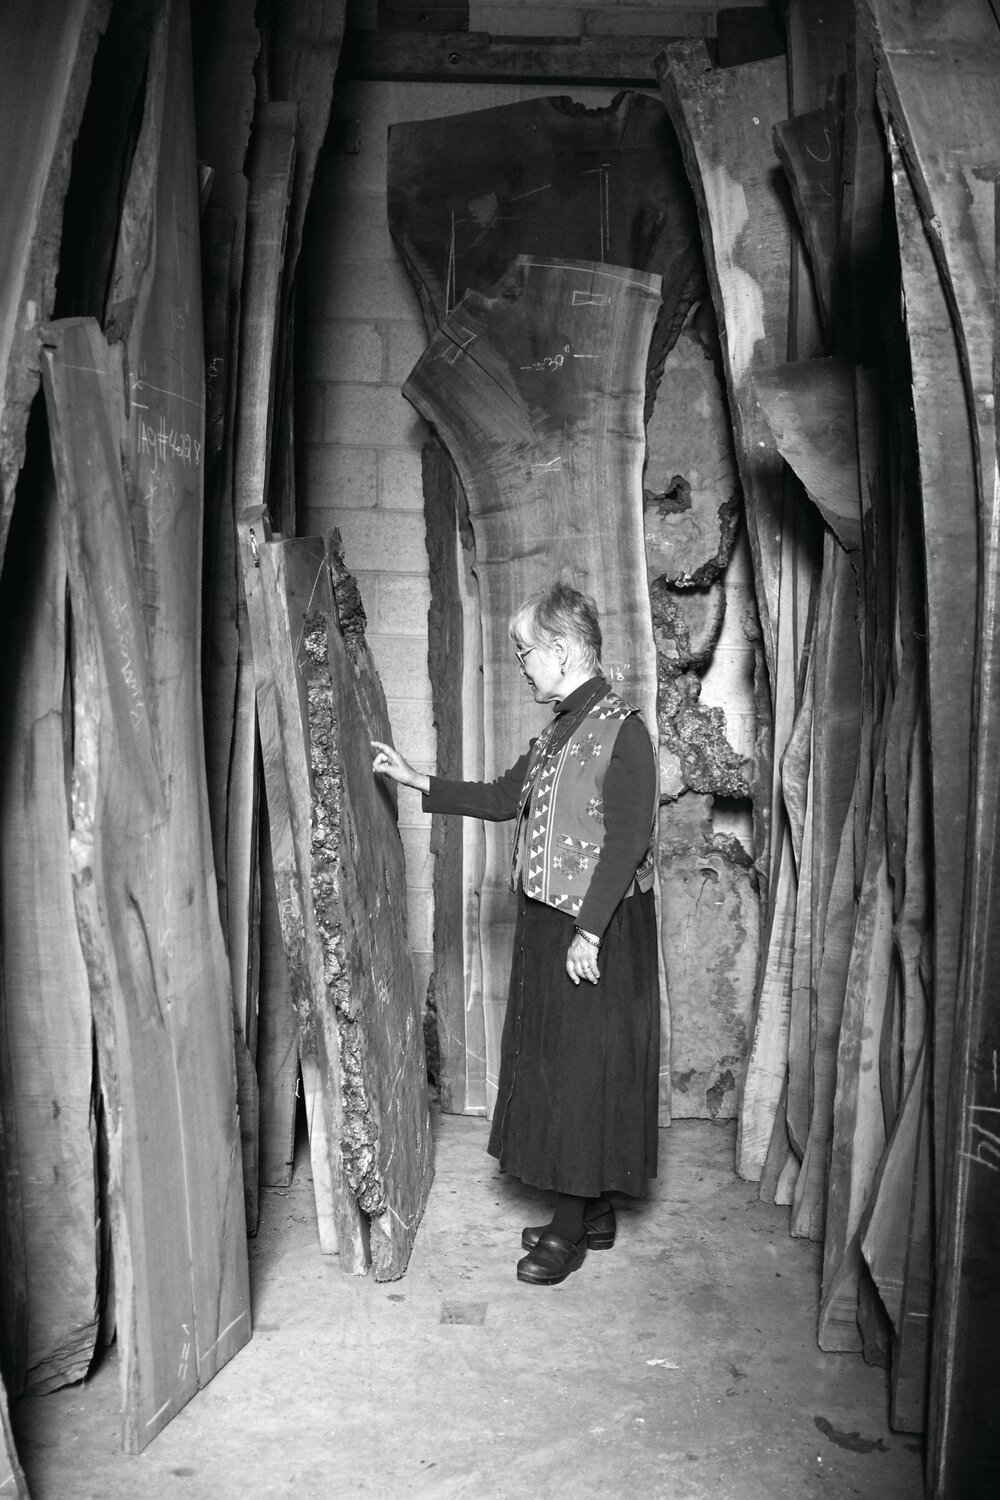 Mira Nakashima stands among the inventory of wood slabs stored as future furniture to be built by studio craftsmen.